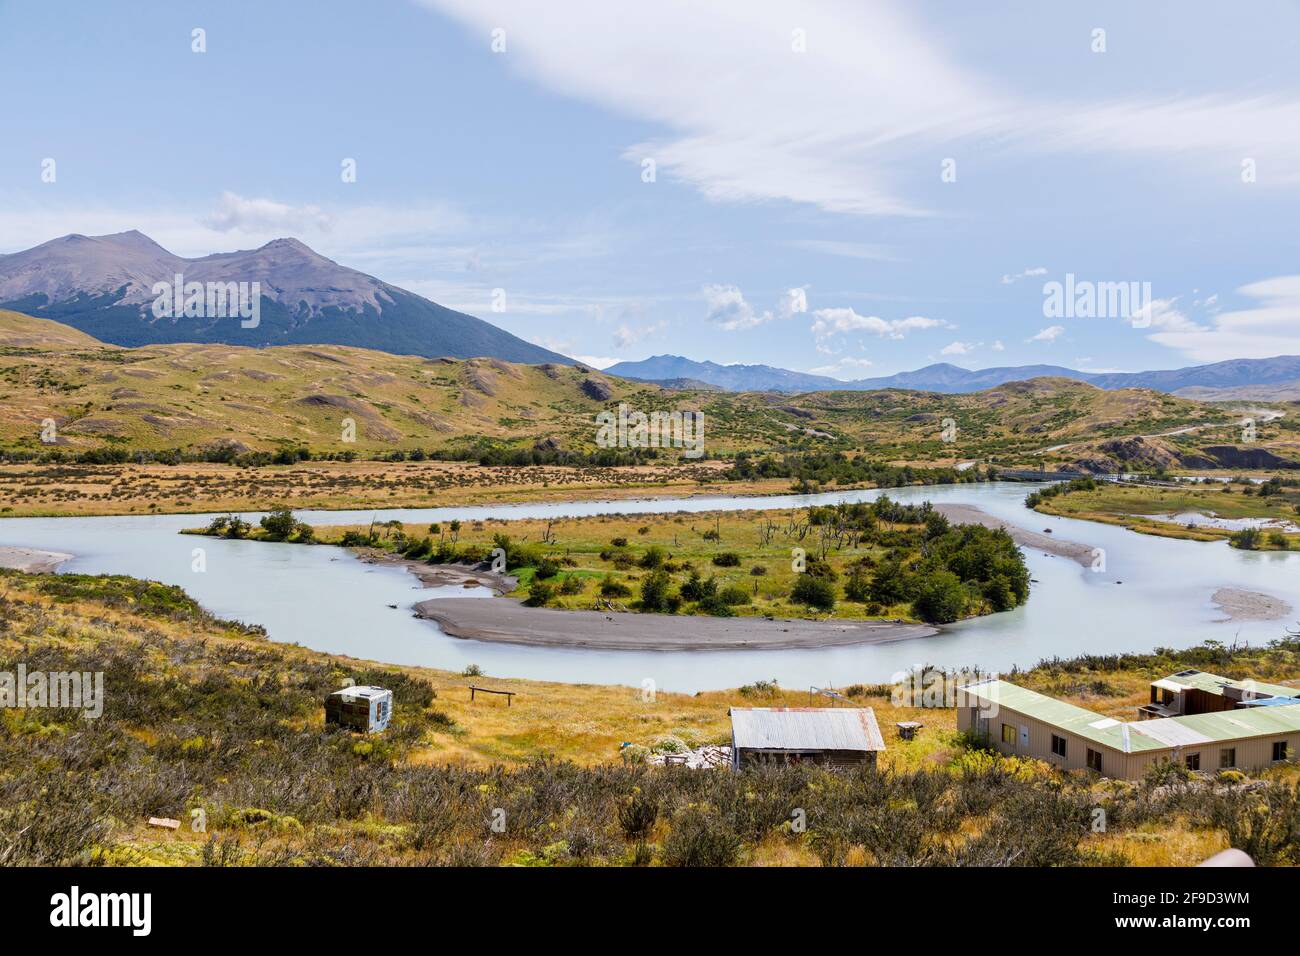 View of bend in river and landscape in the region of Laguna Amarga in Torres del Paine National Park, Patagonia, southern Chile Stock Photo